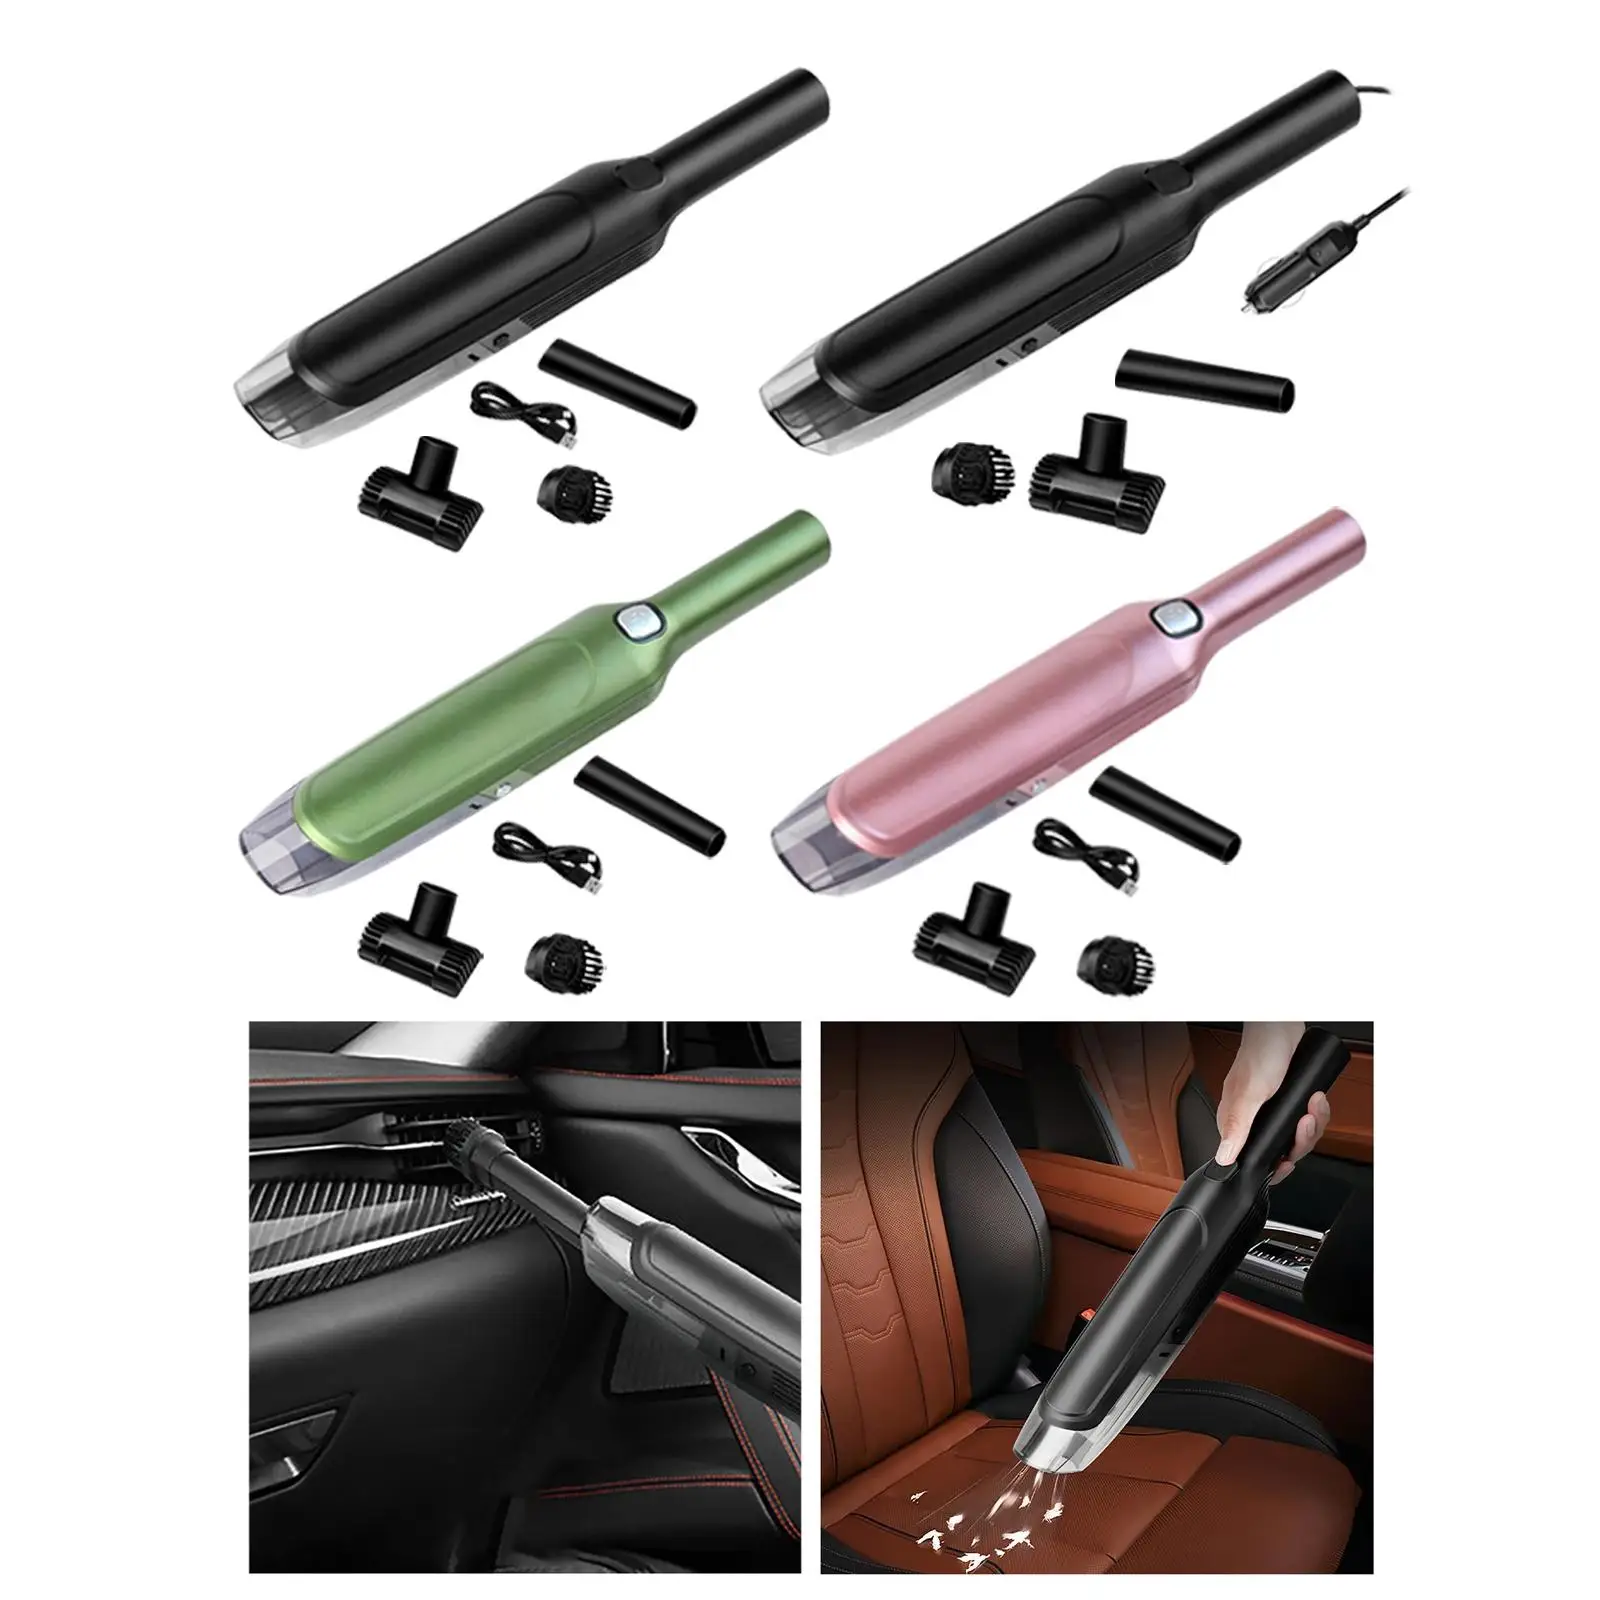 Cordless Car Vacuum Cleaner 8000PA Washable 4000mAh Battery Handheld Vacuum for Car Crevices Appliance USB Rechargeable